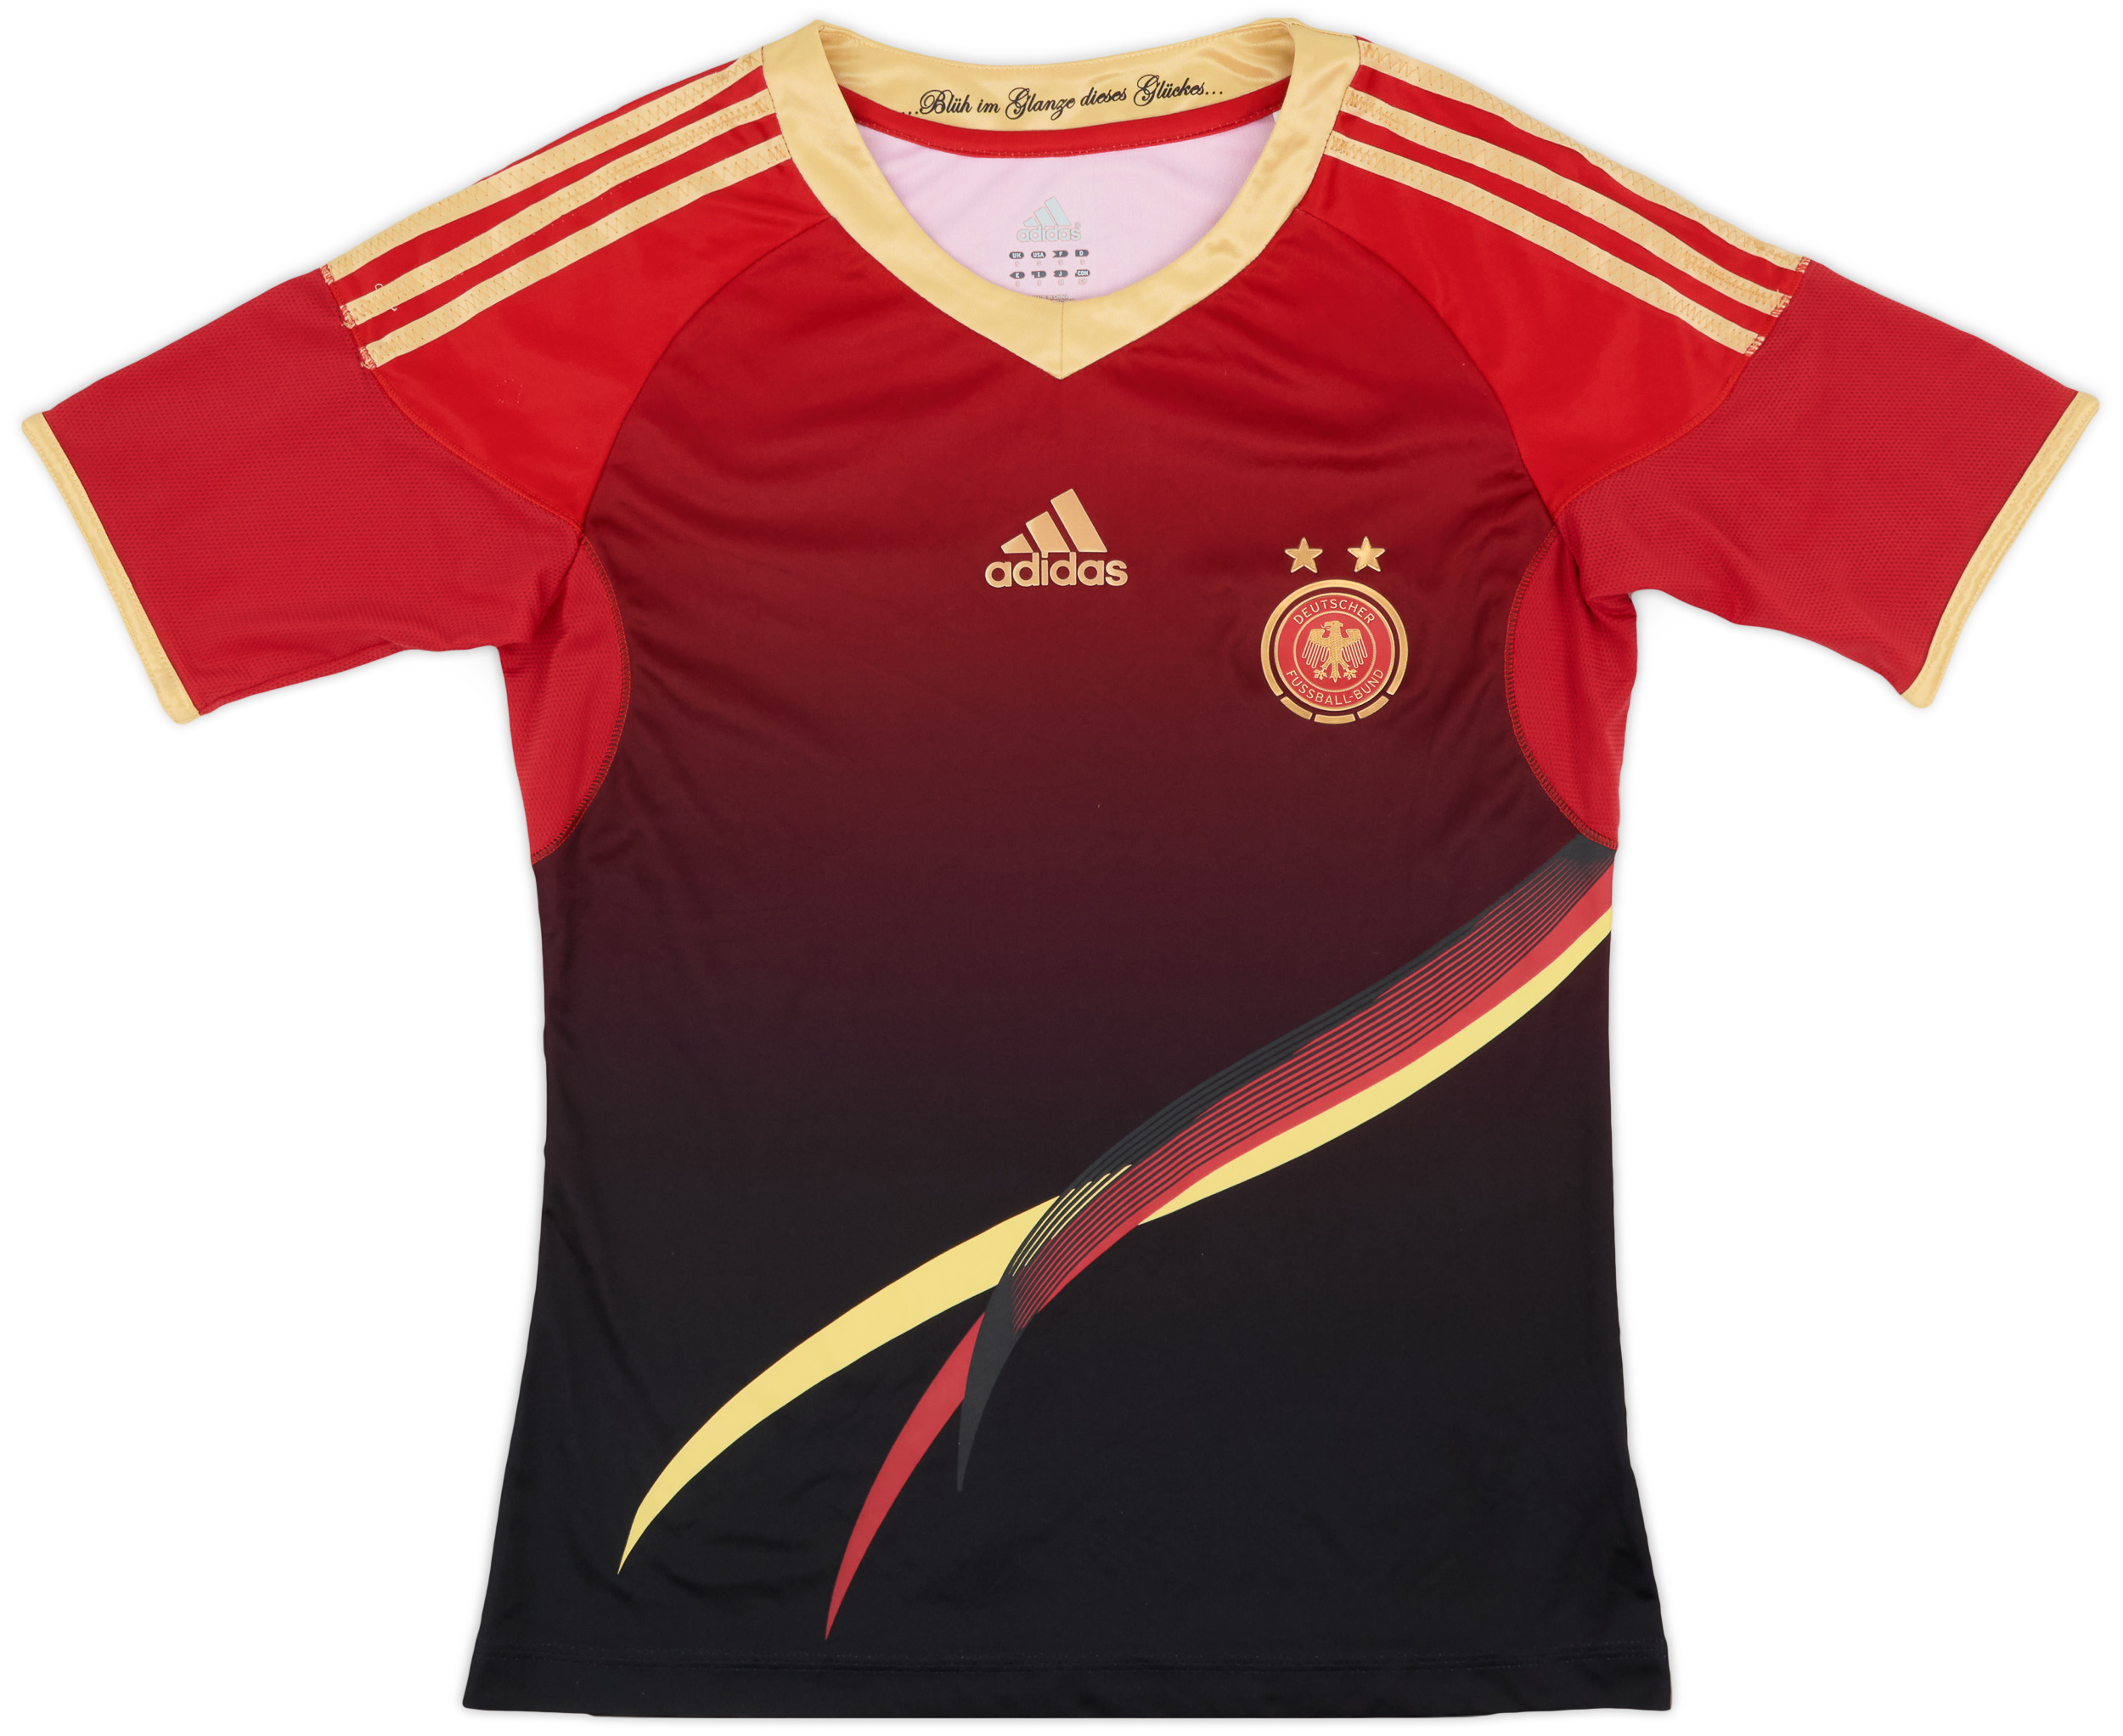 2011-12 Germany Women's Player Issue Away Shirt - 4/10 - ()